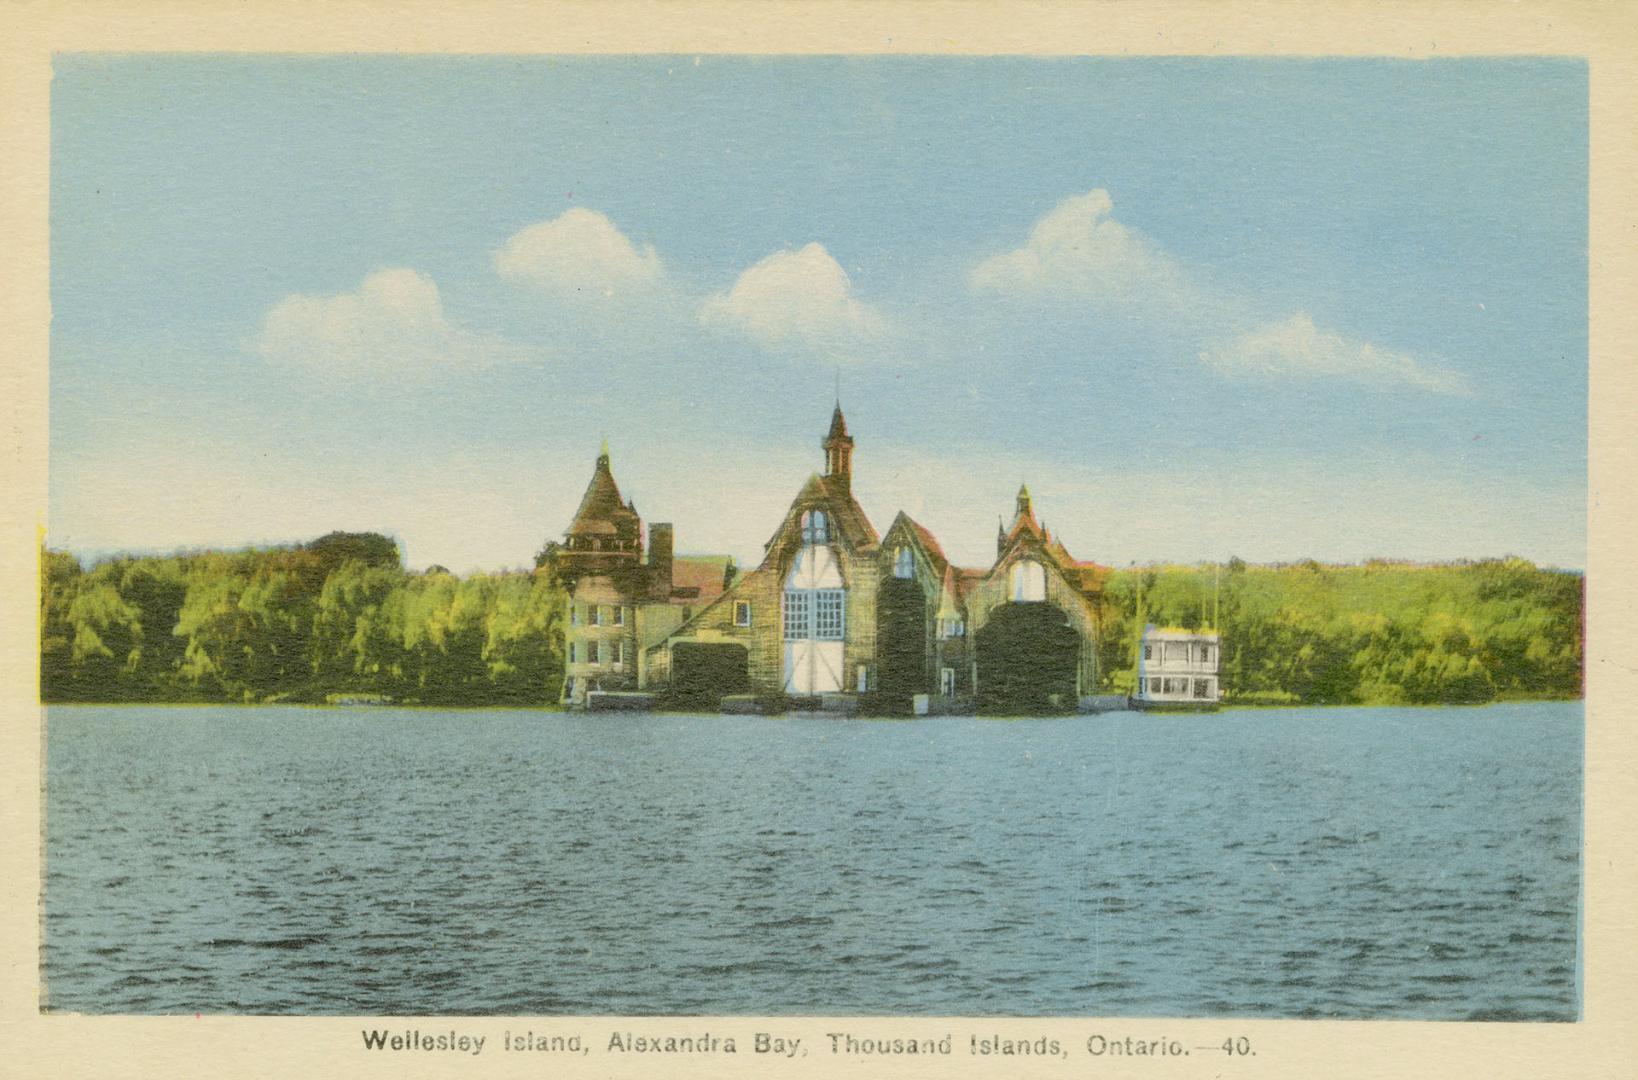 Colorized photograph of a view of a waterway, with a large summer resort on the river bank.